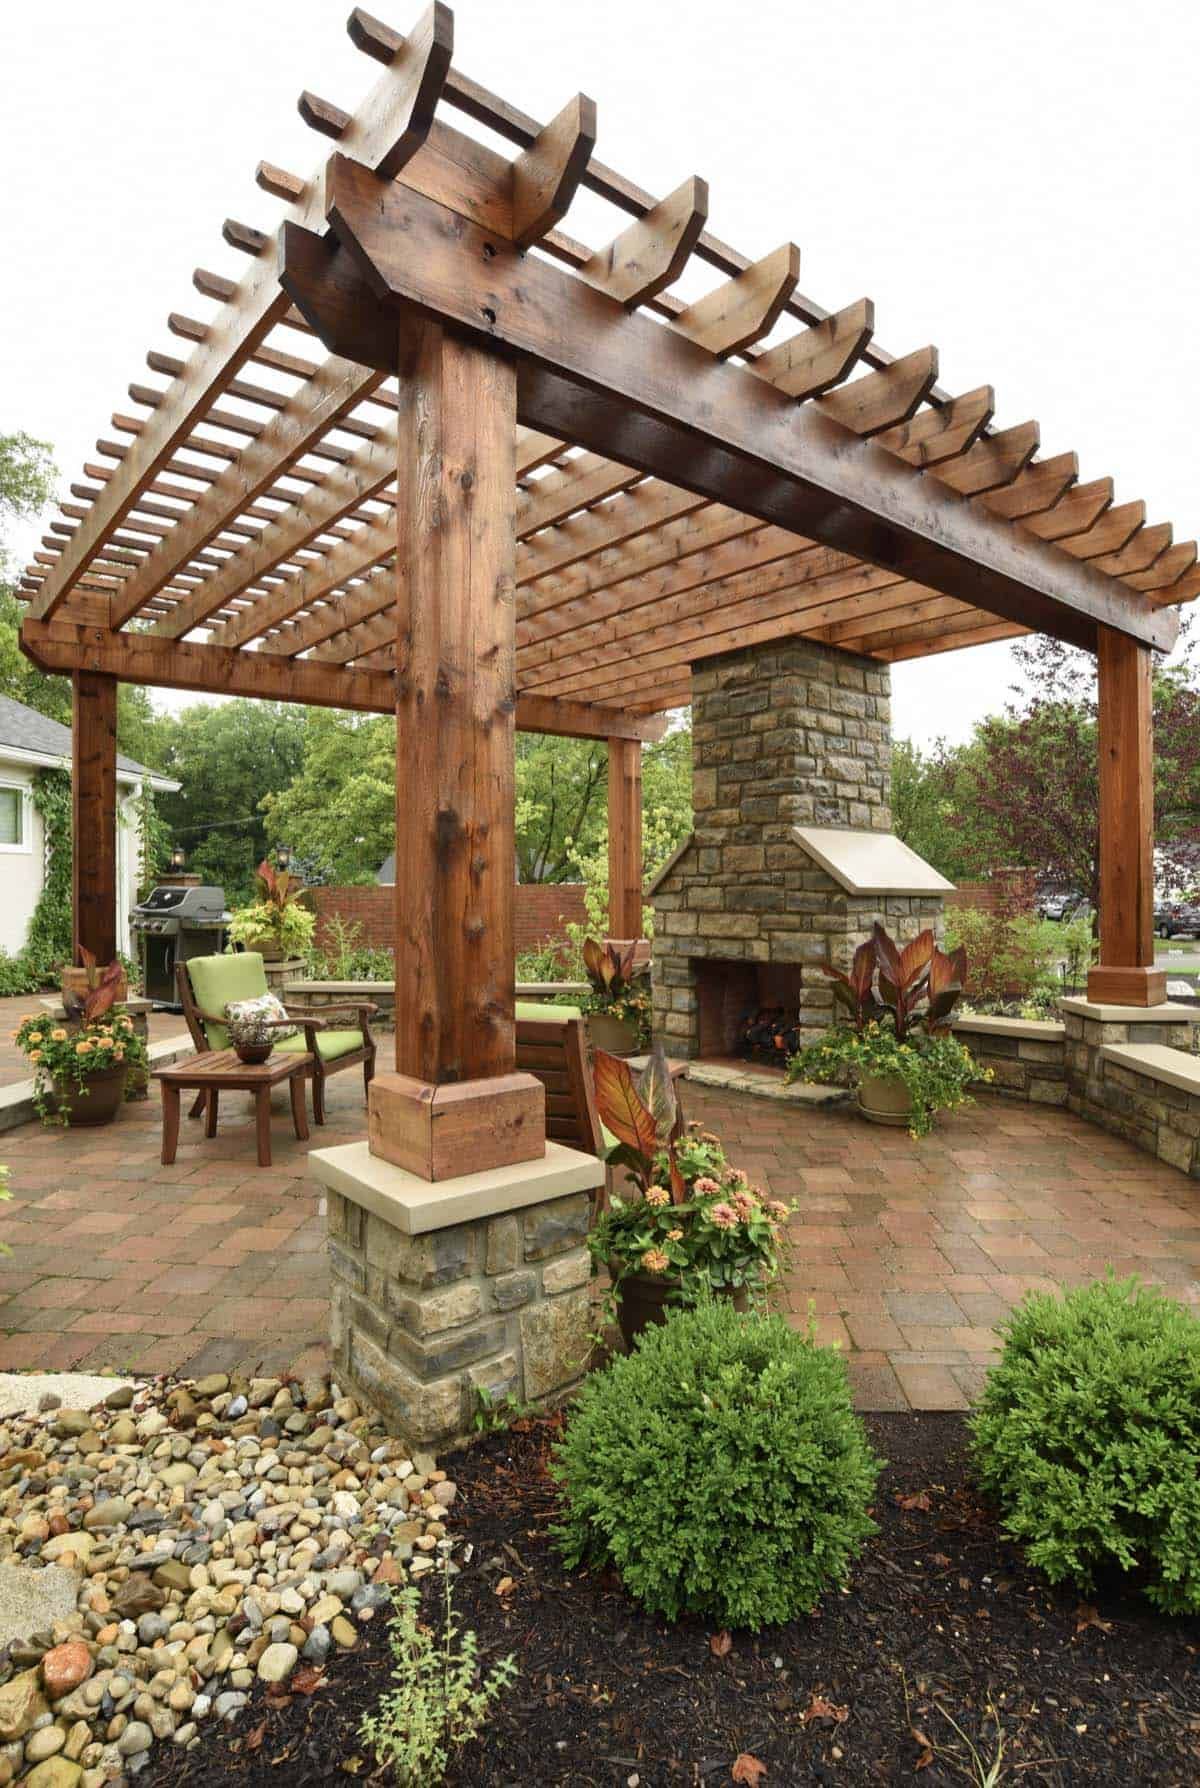 Transform Your Outdoor Space with a Stunning Pergola Patio Design